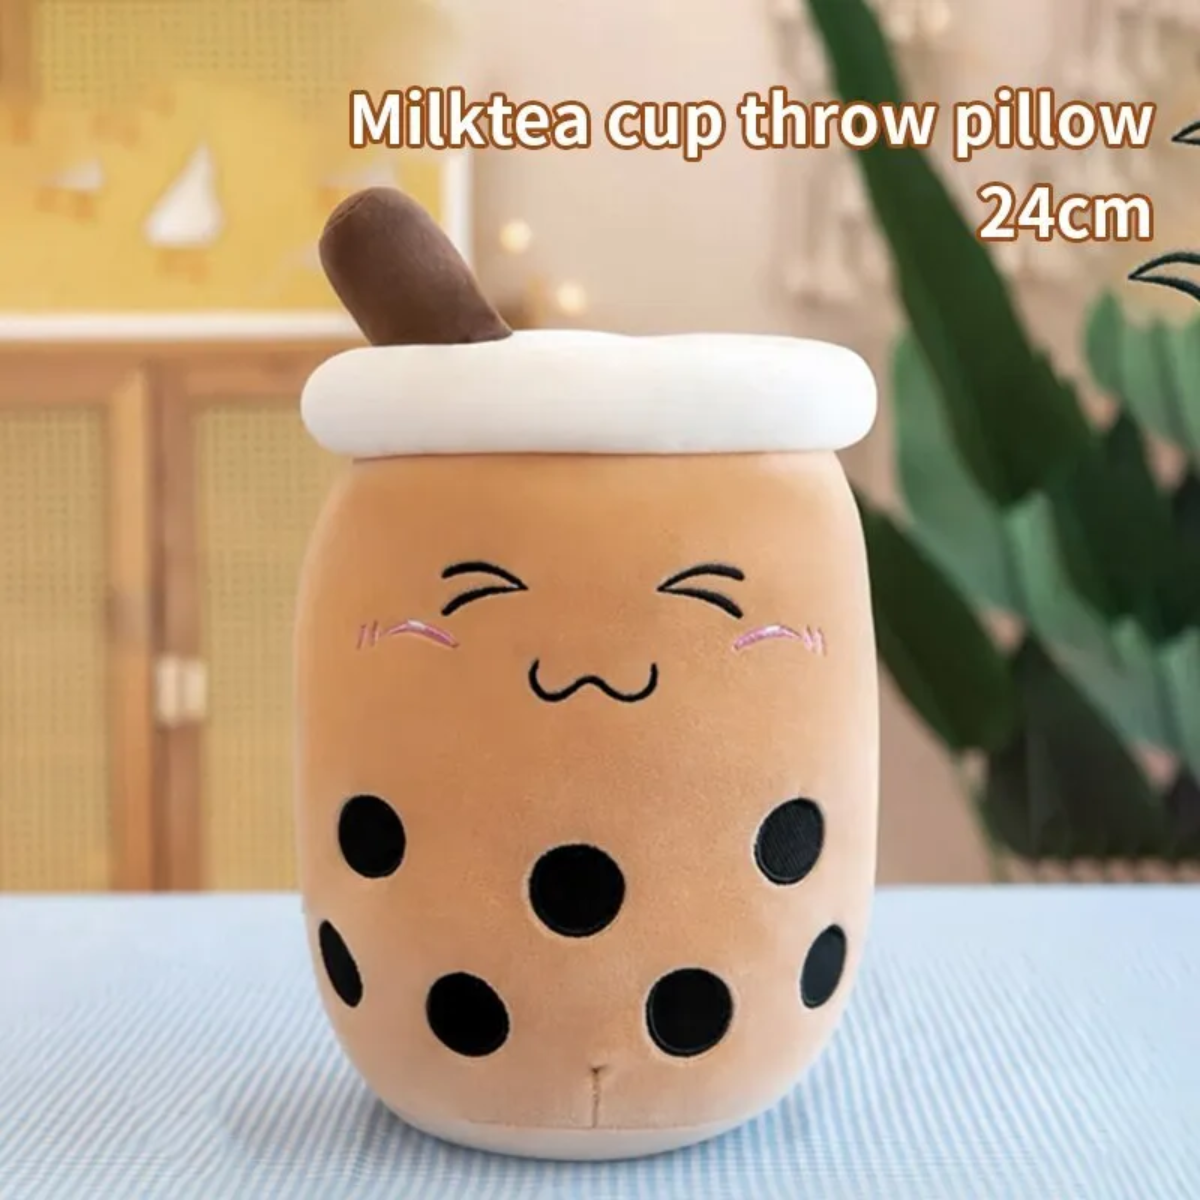 Boba Bubble Tea Bliss Pillow – 24cm of Cuddly, Cheery Comfort!